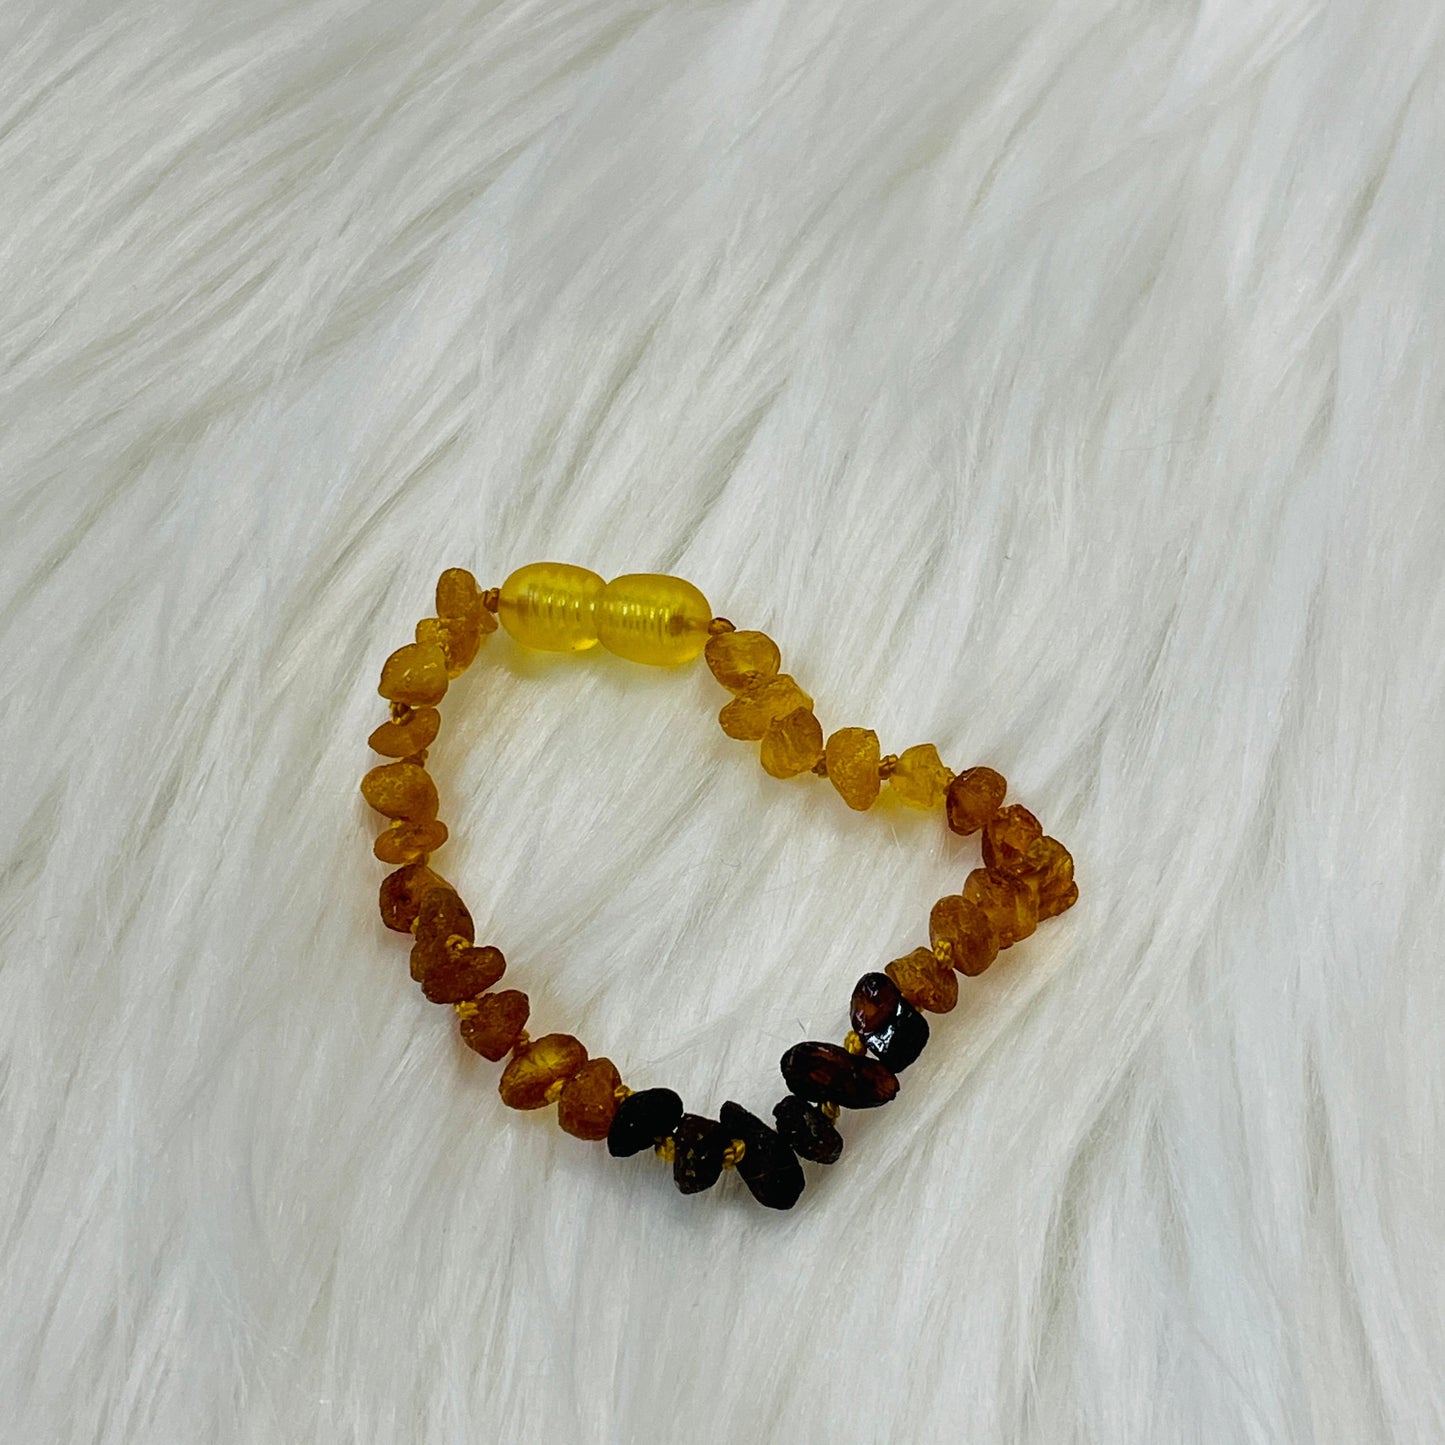 Authentic Lithuanian Baltic Amber Unpolished Ombre Anklet - 5"